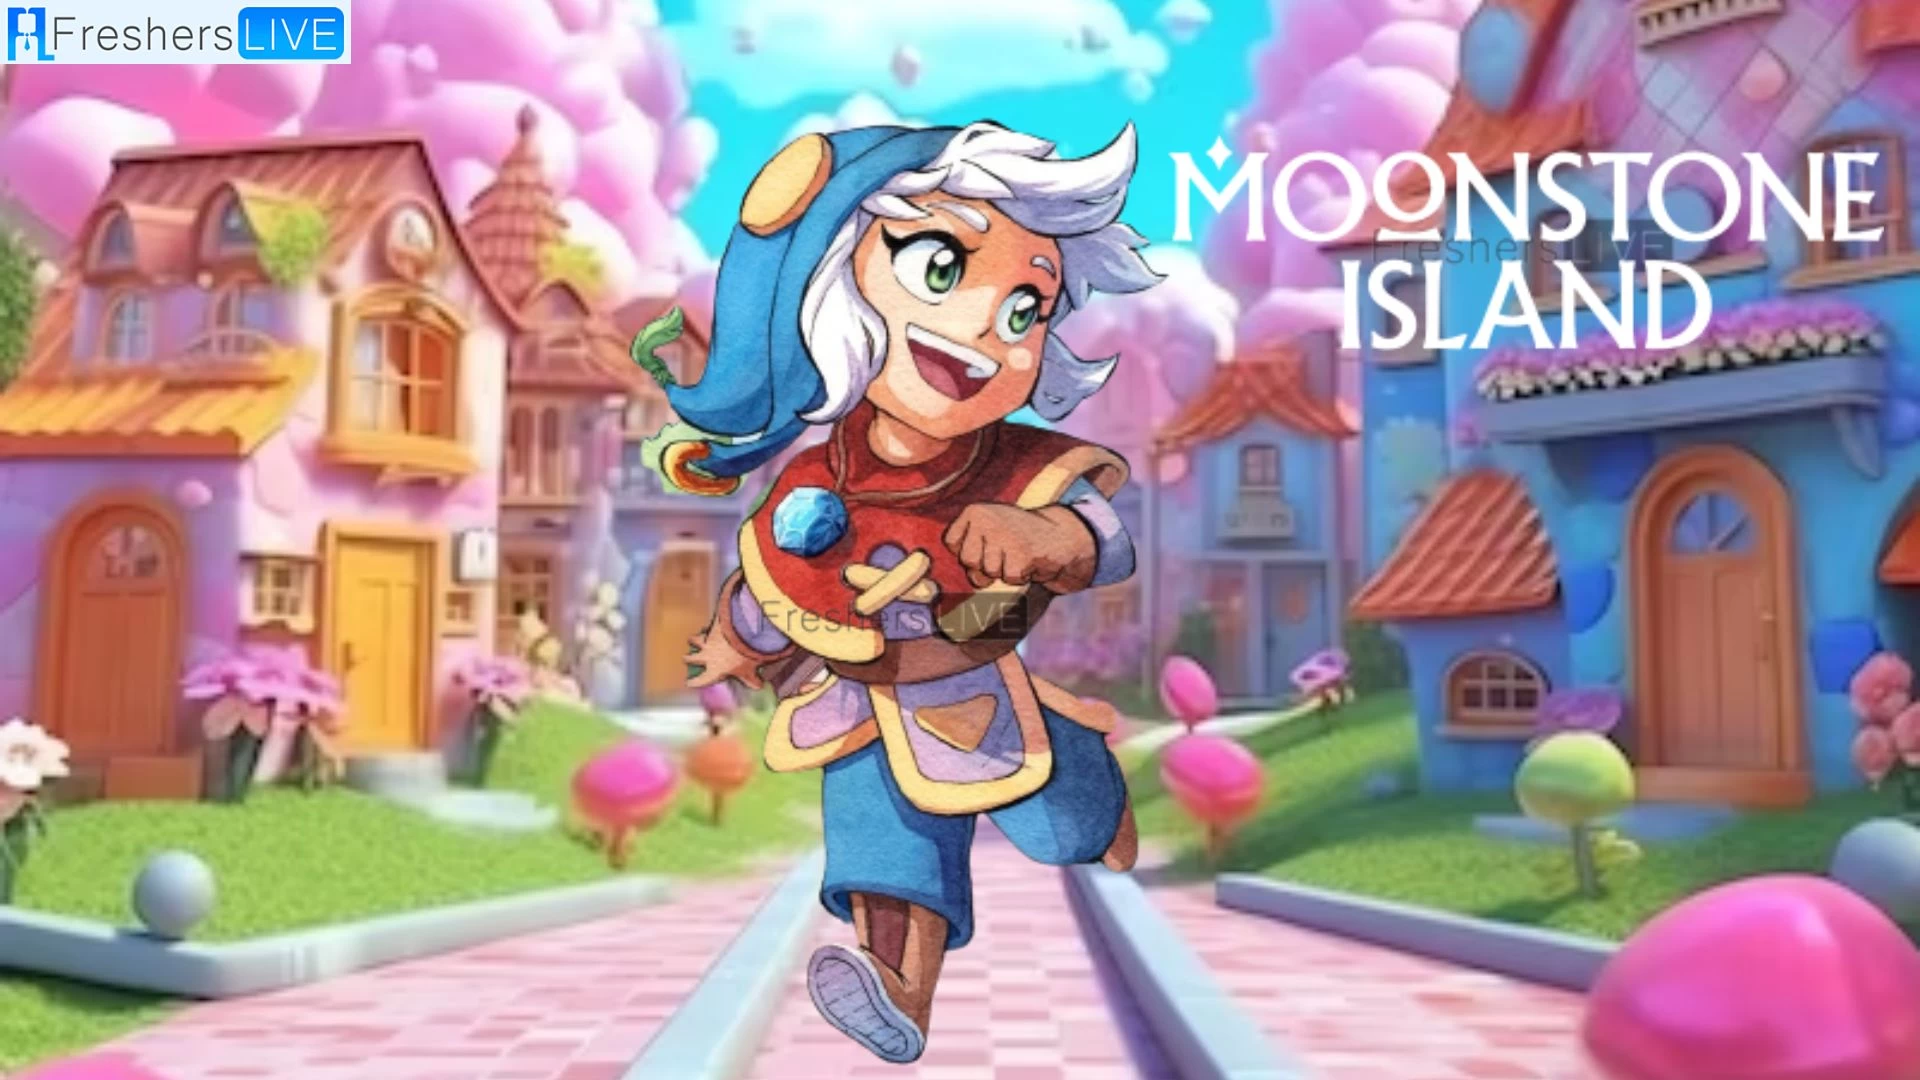 How to Find Clay and Other Spirit Resources in Moonstone Island? Complete Guide